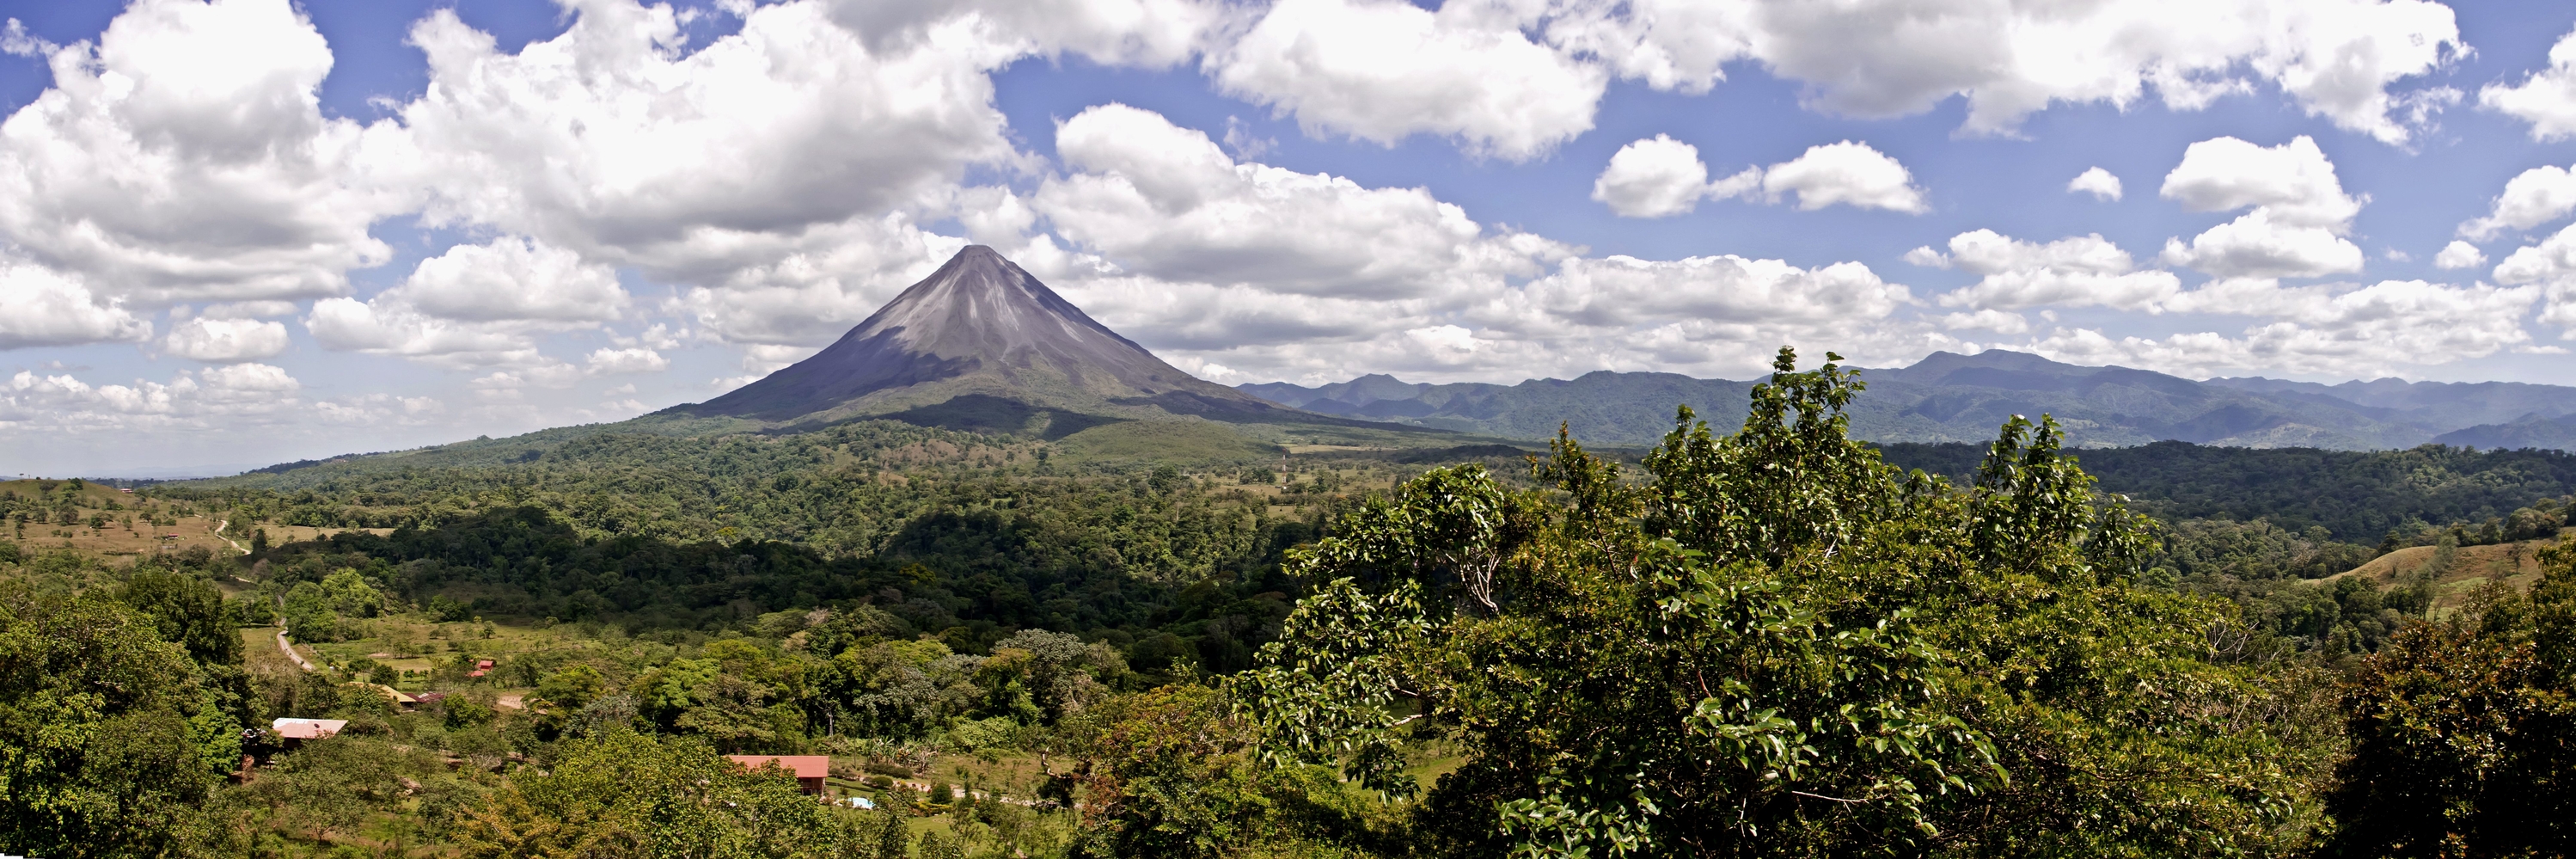 8-night Costa Rica escape with flights & hotels from $954